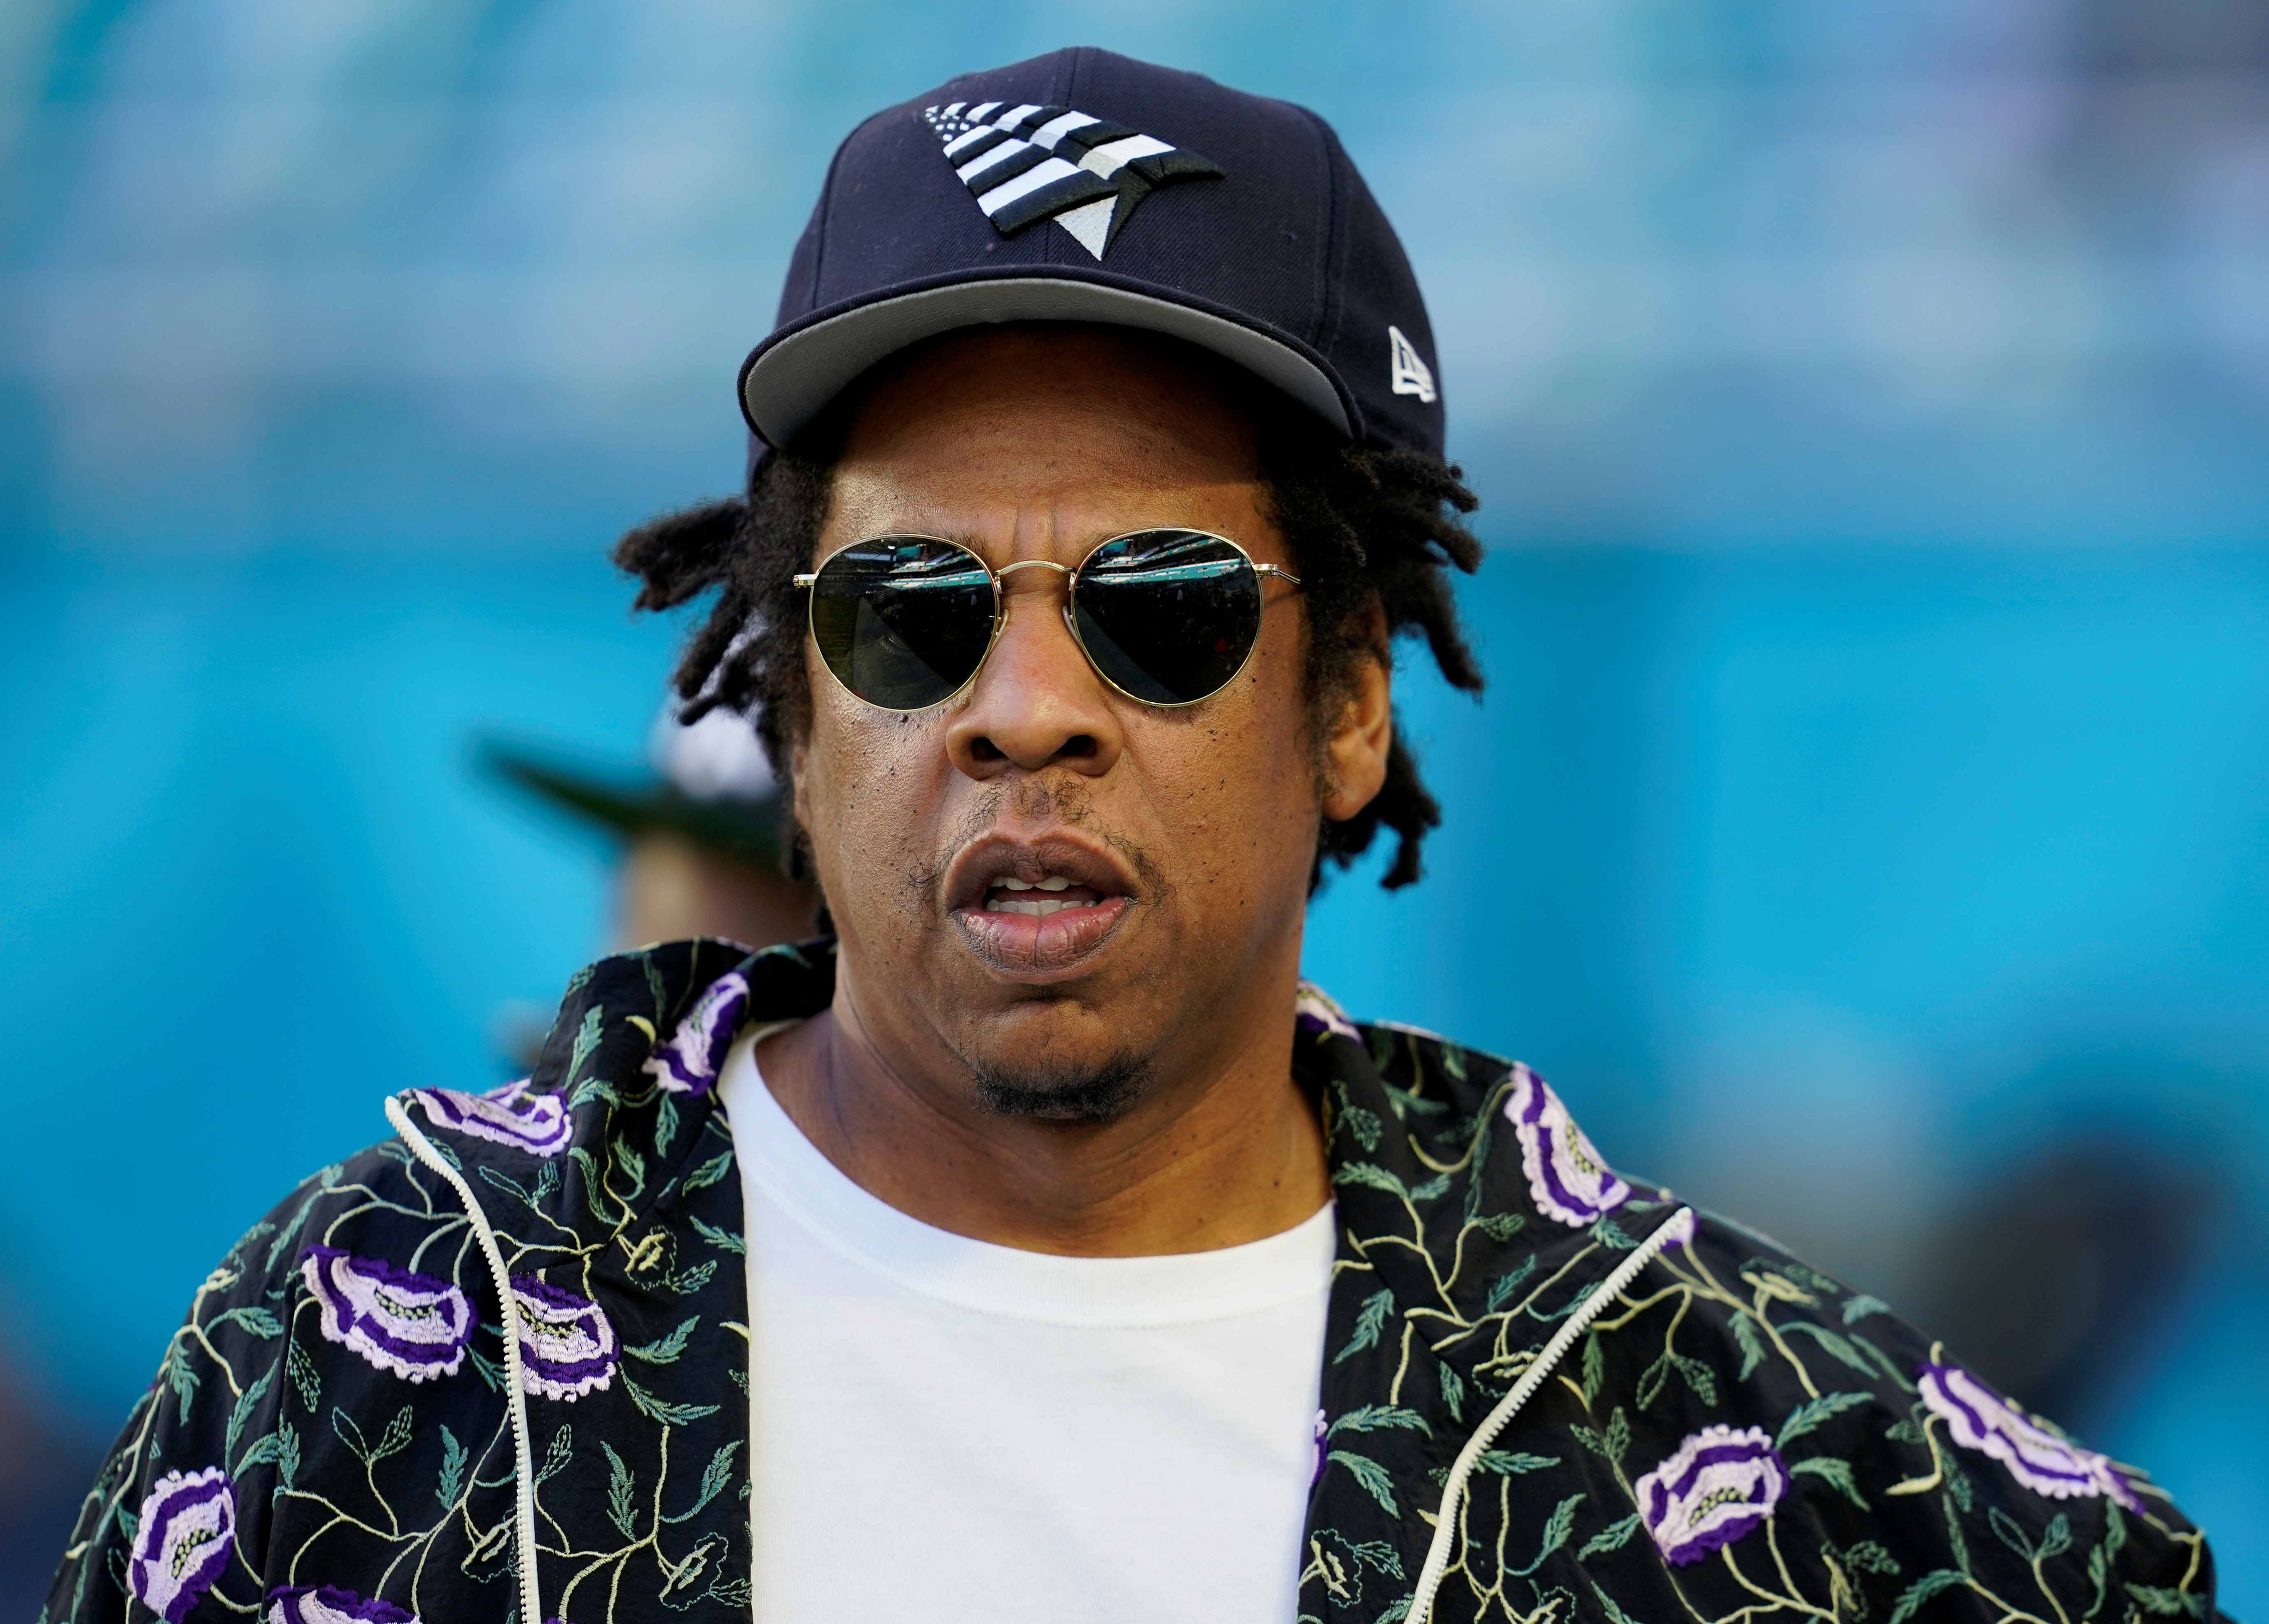 Jay-Z, The Go-Gos among Rock & Roll Hall of Fame nominees